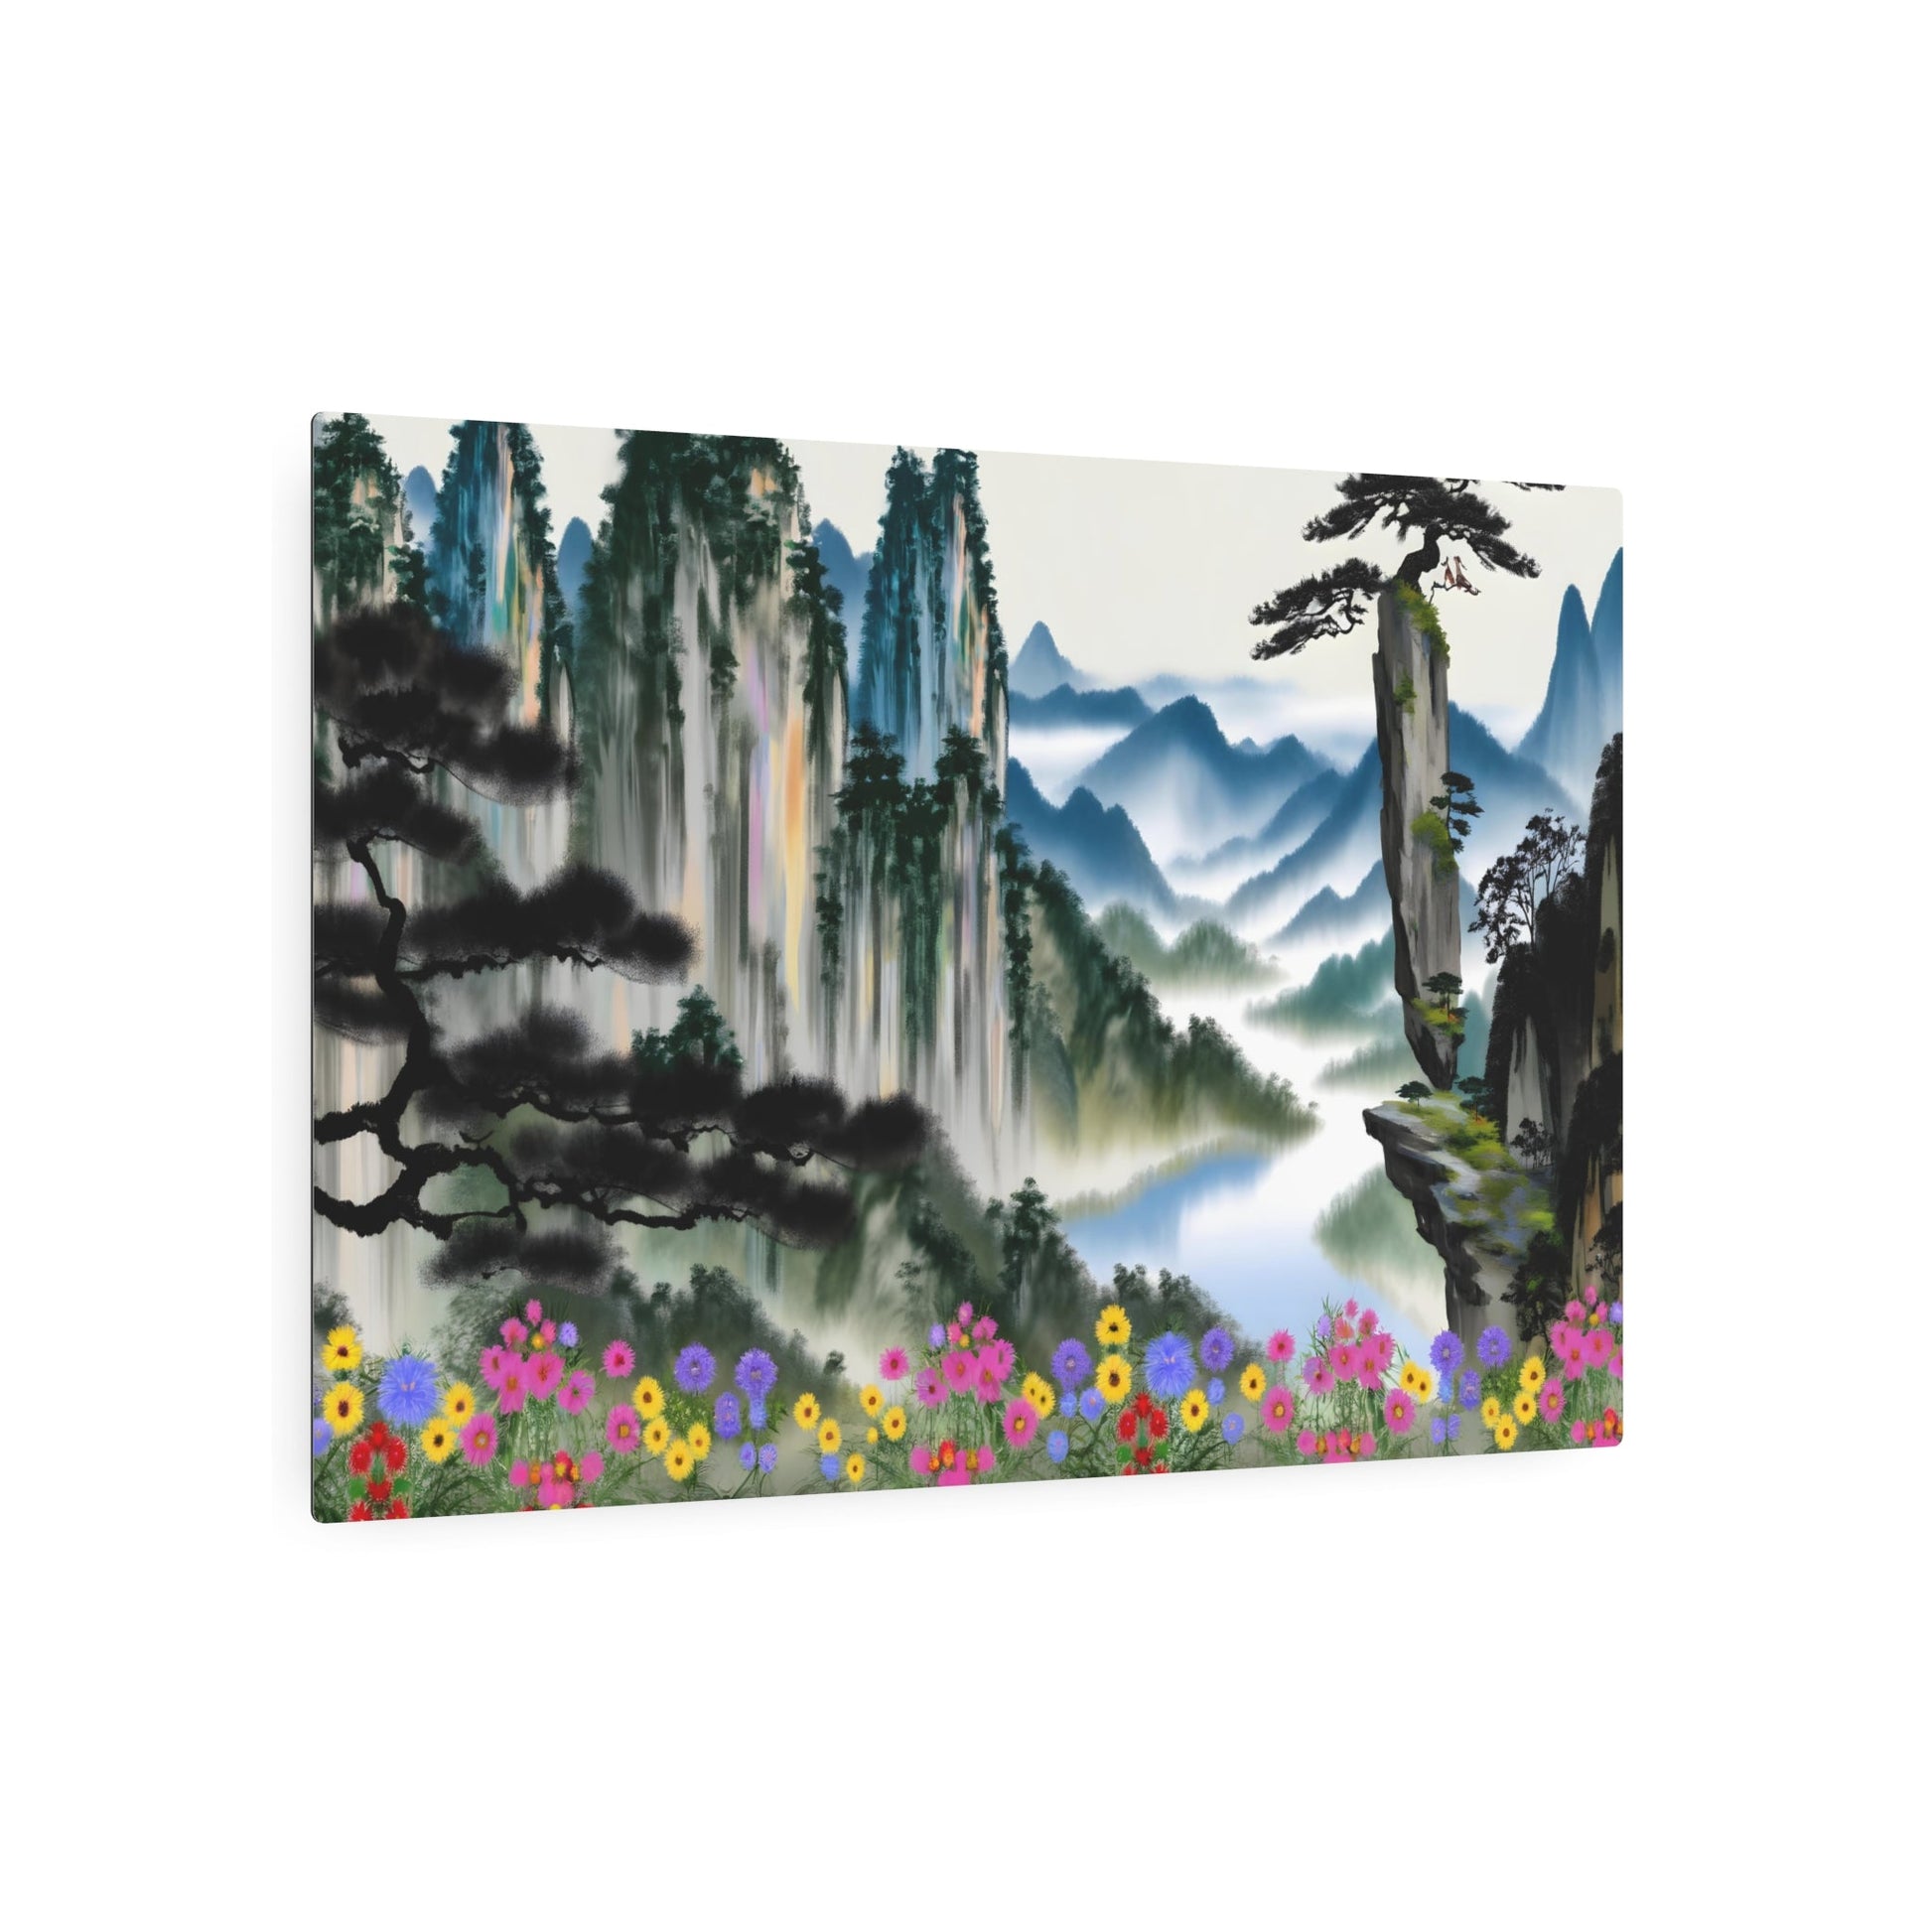 Metal Poster Art | "Harmony in Nature: Traditional Chinese Landscape Art with Vibrant Wildflowers - Asian Art Styles Collection" - Metal Poster Art 36″ x 24″ (Horizontal) 0.12''